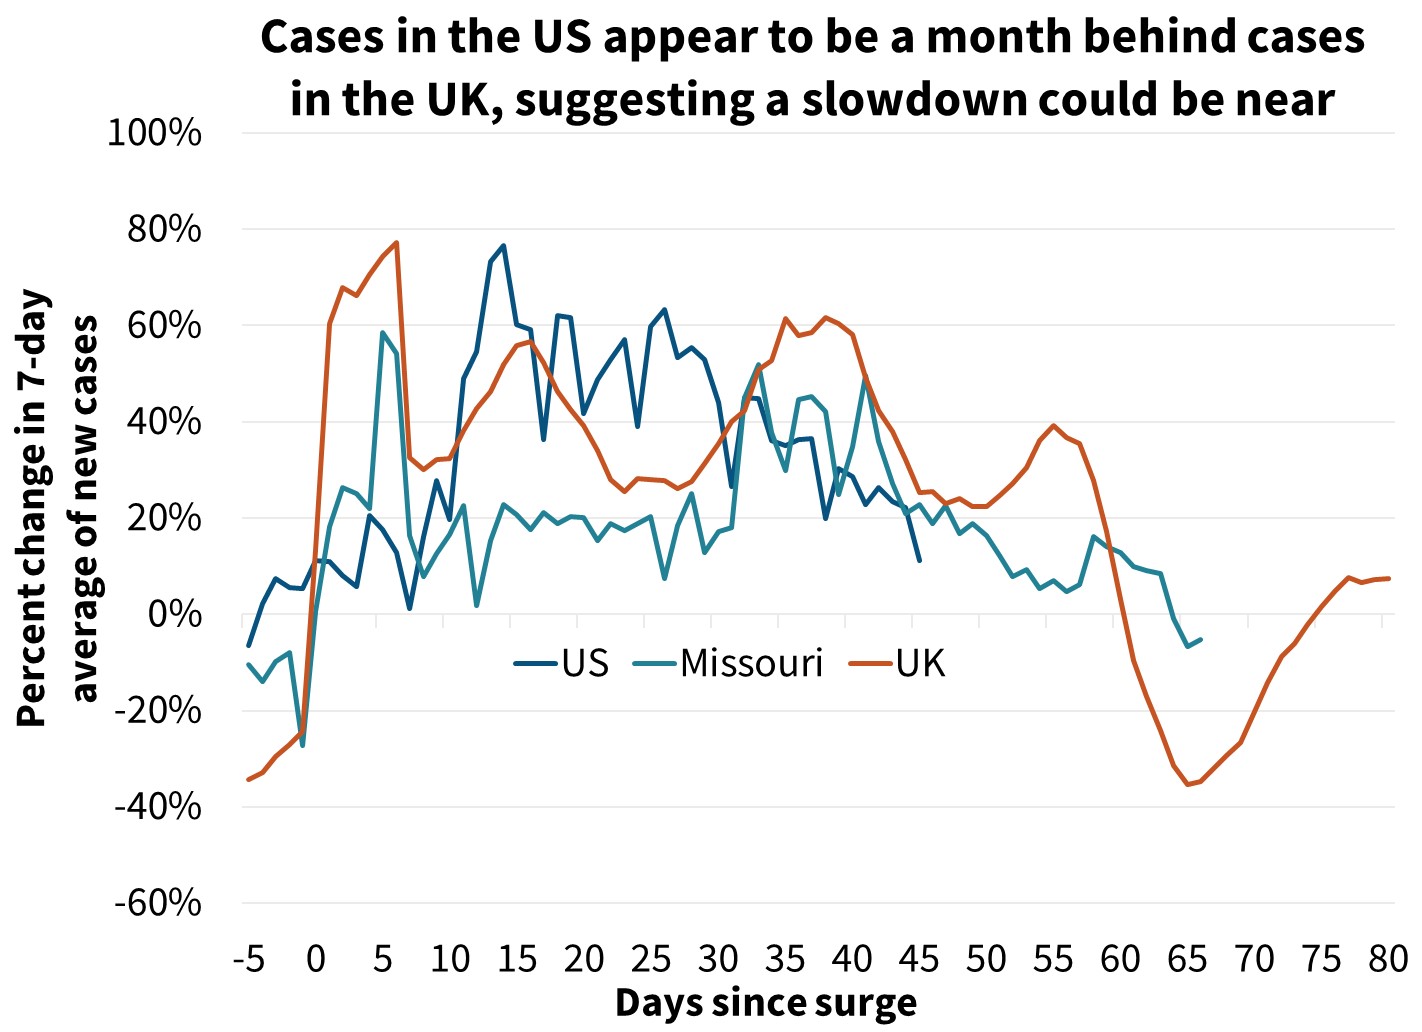  Cases in the US appear to be a month behind cases in the UK suggesting a slowdown could be near